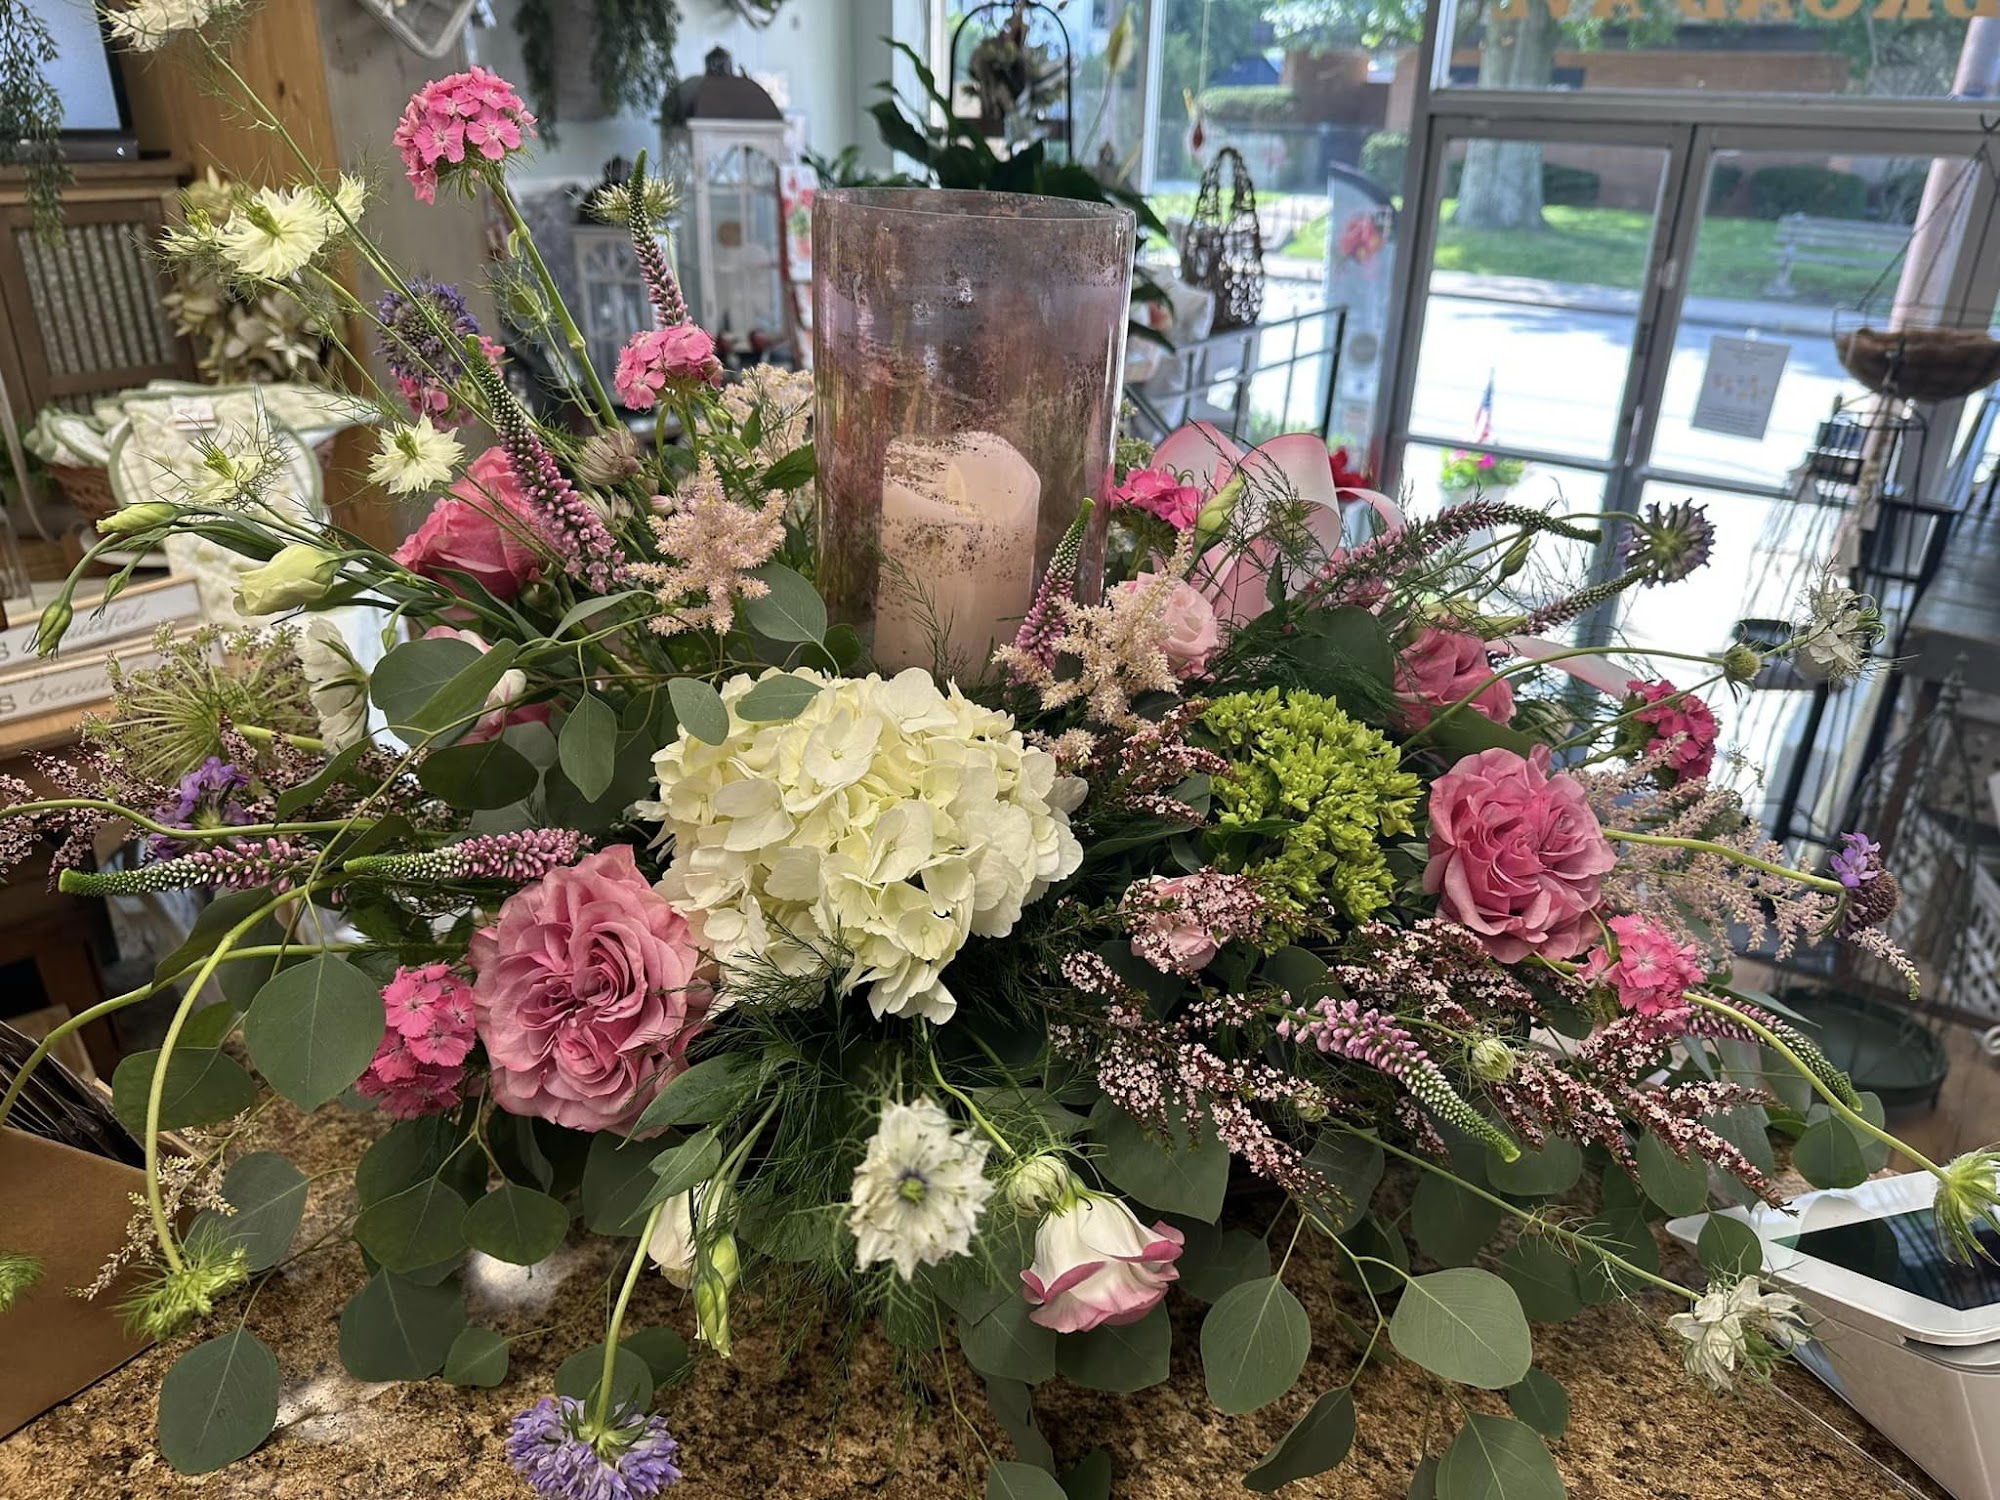 Creative Elegance Floral Decor and Gifts 719 Broad Ave, Belle Vernon Pennsylvania 15012